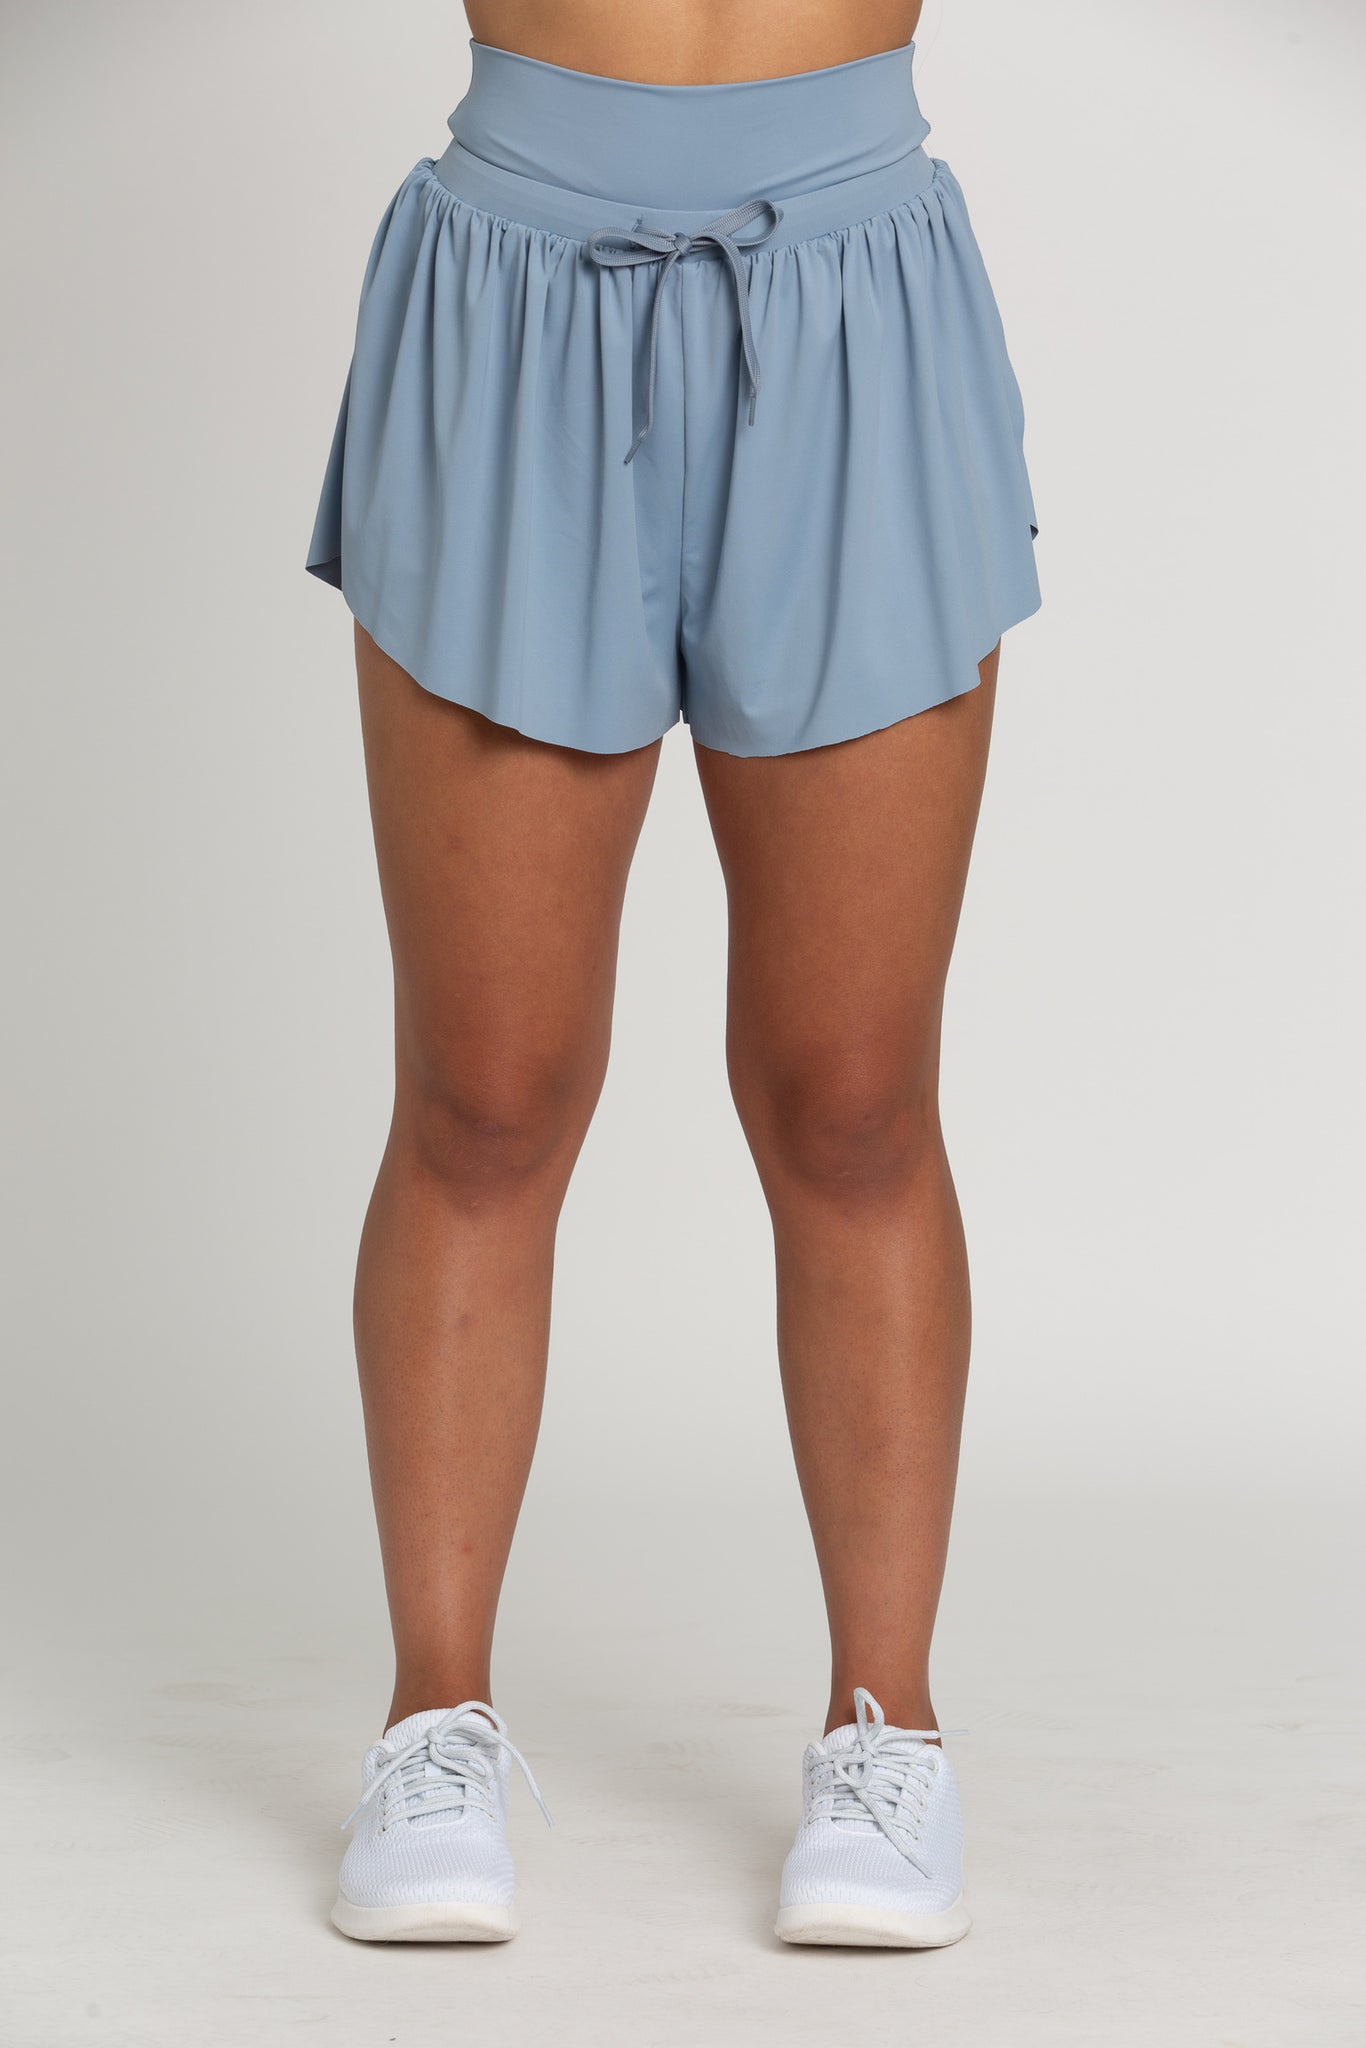 Echo Blue Go-with-the-Flow Athletic Shorts